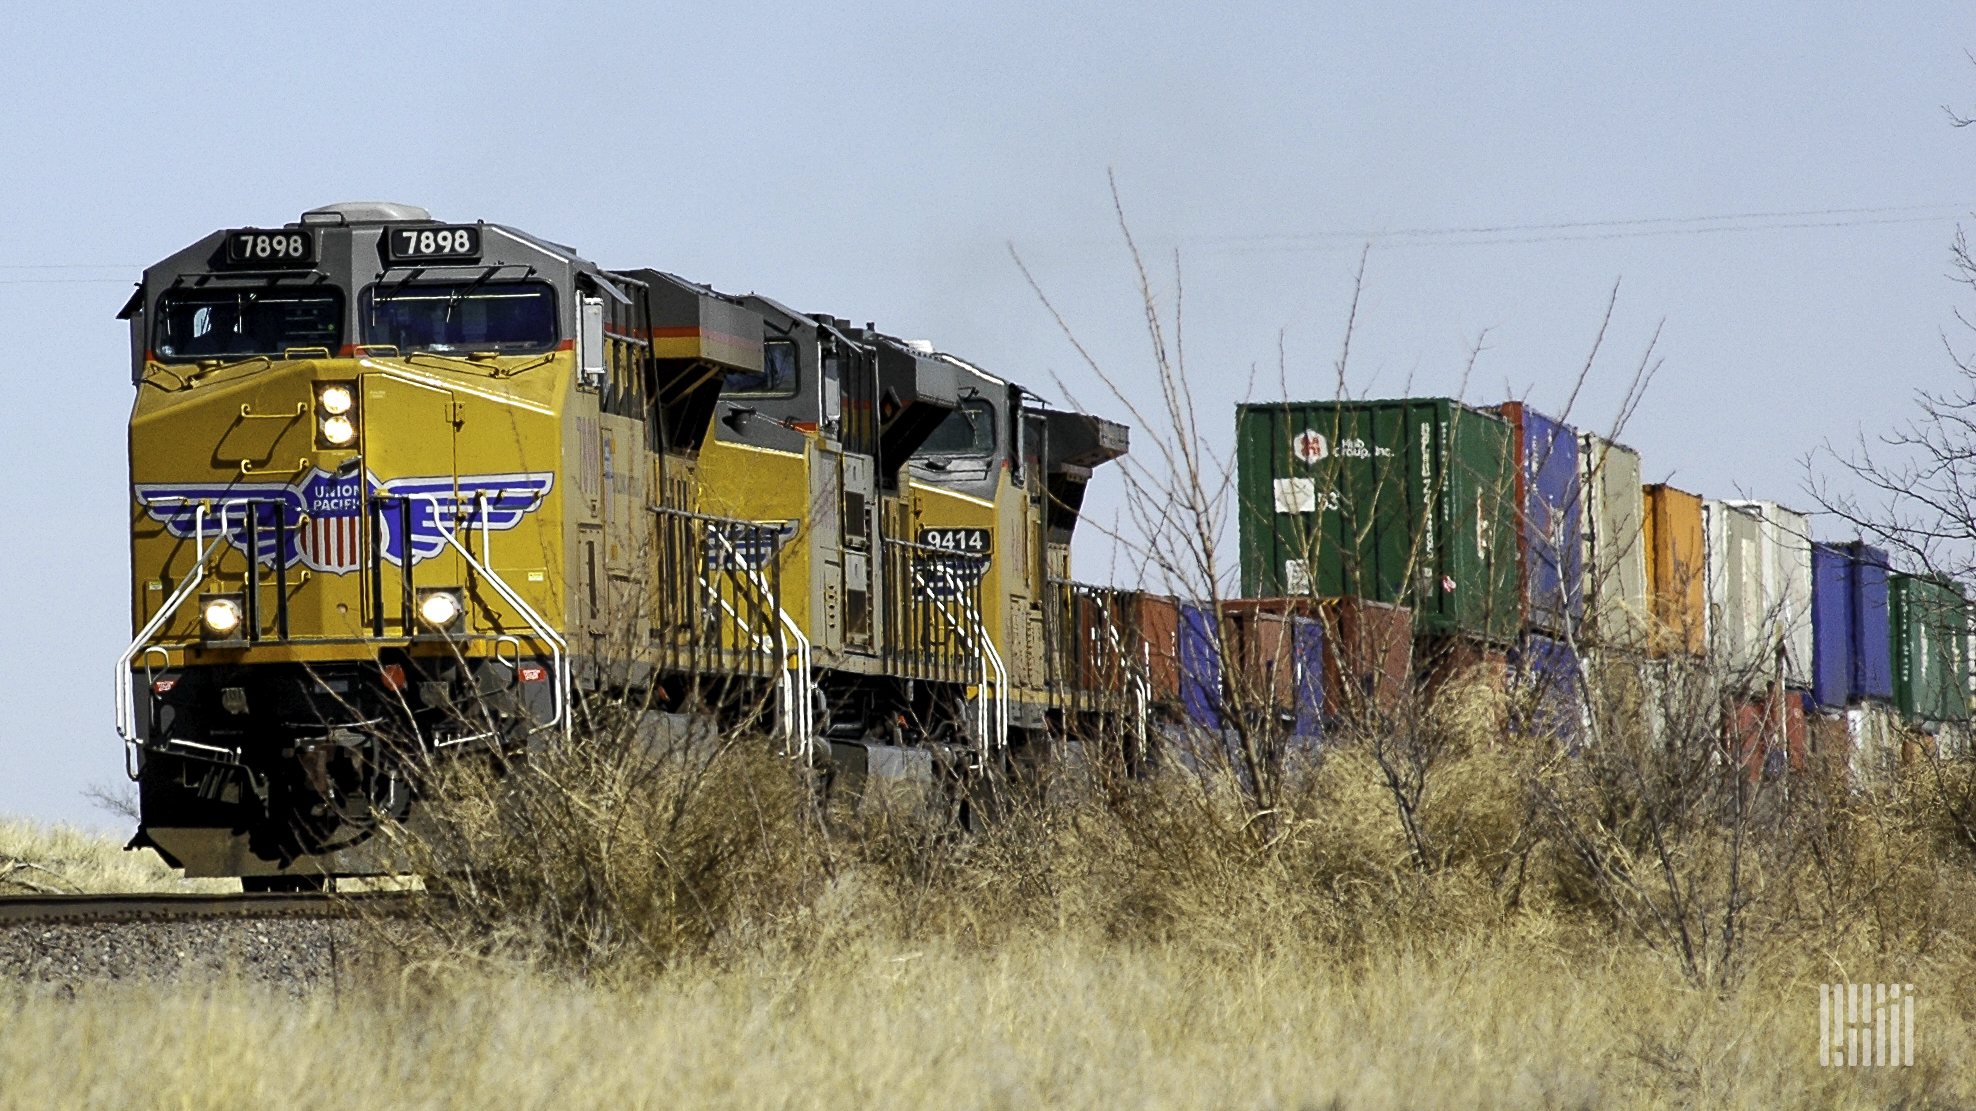 A photograph of a Union Pacific train hauling intermodal containers.